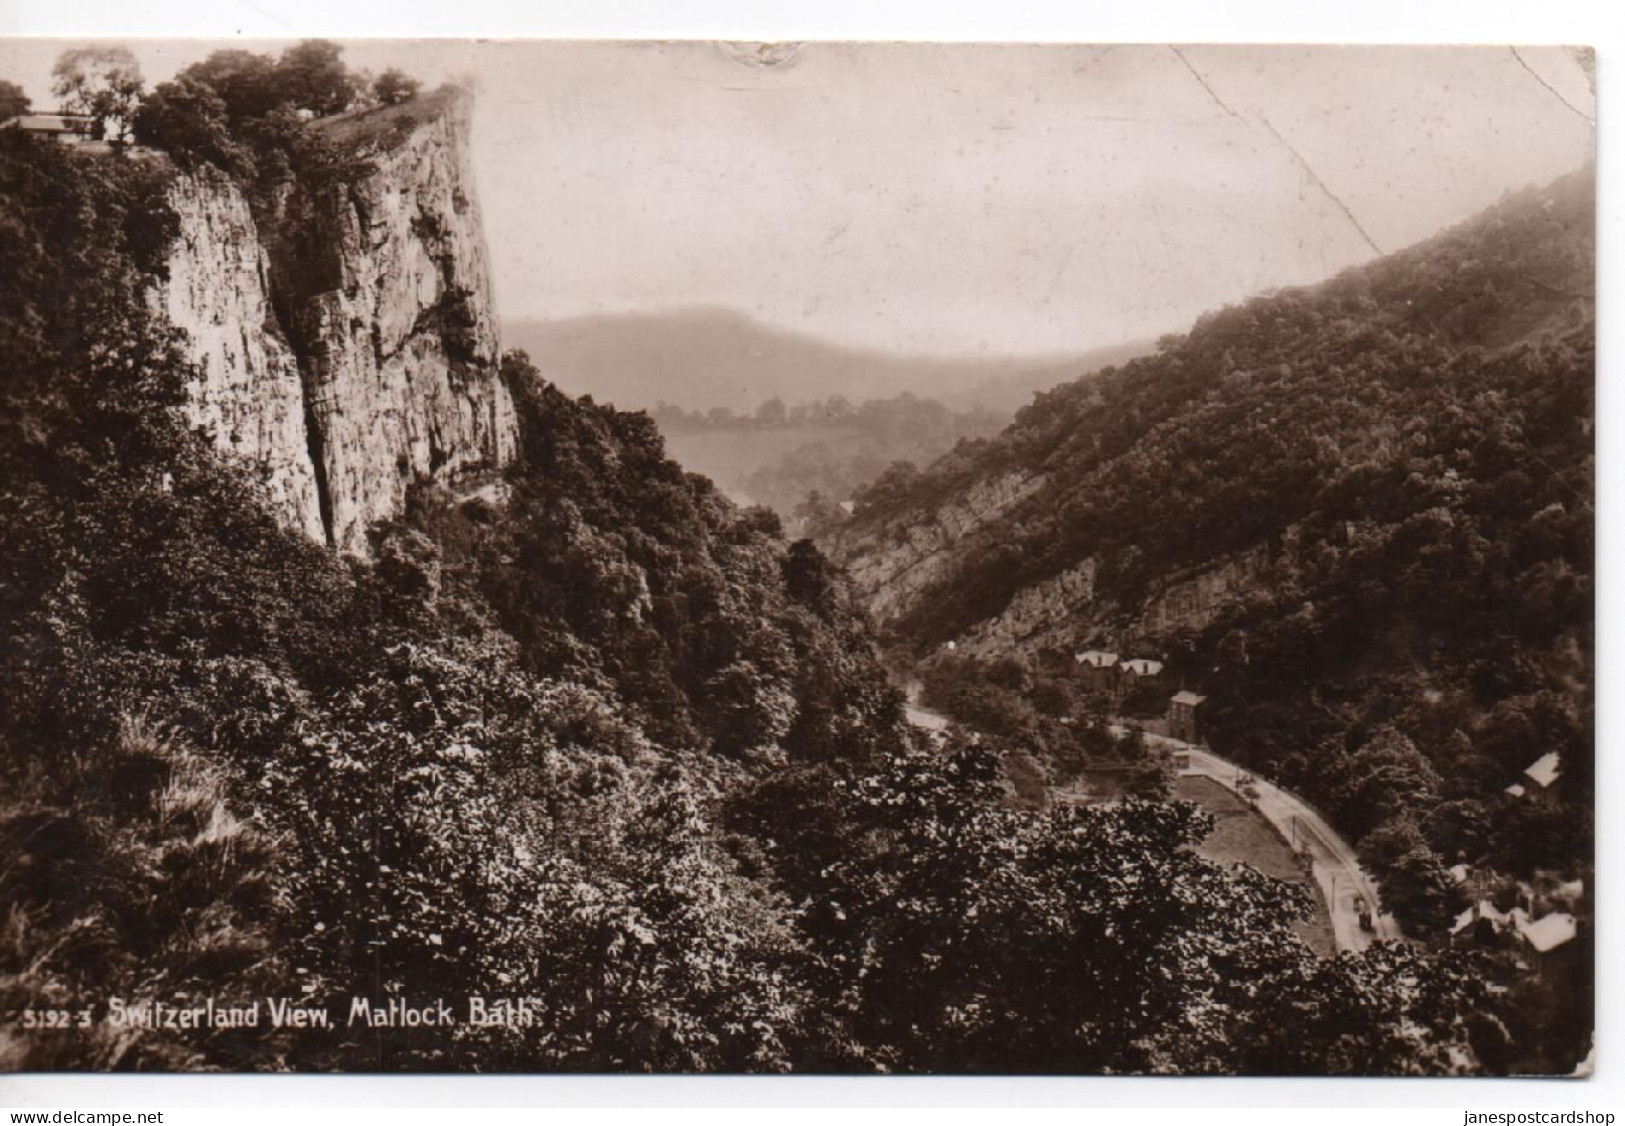 REAL PHOTOGRAPHIC POSTCARD SWITZERLAND VIEW - MATLOCK BATH DERBYSHIRE - LOCAL PUBLISHER WITH WEST DIDSBURY MANCHESTER PM - Derbyshire